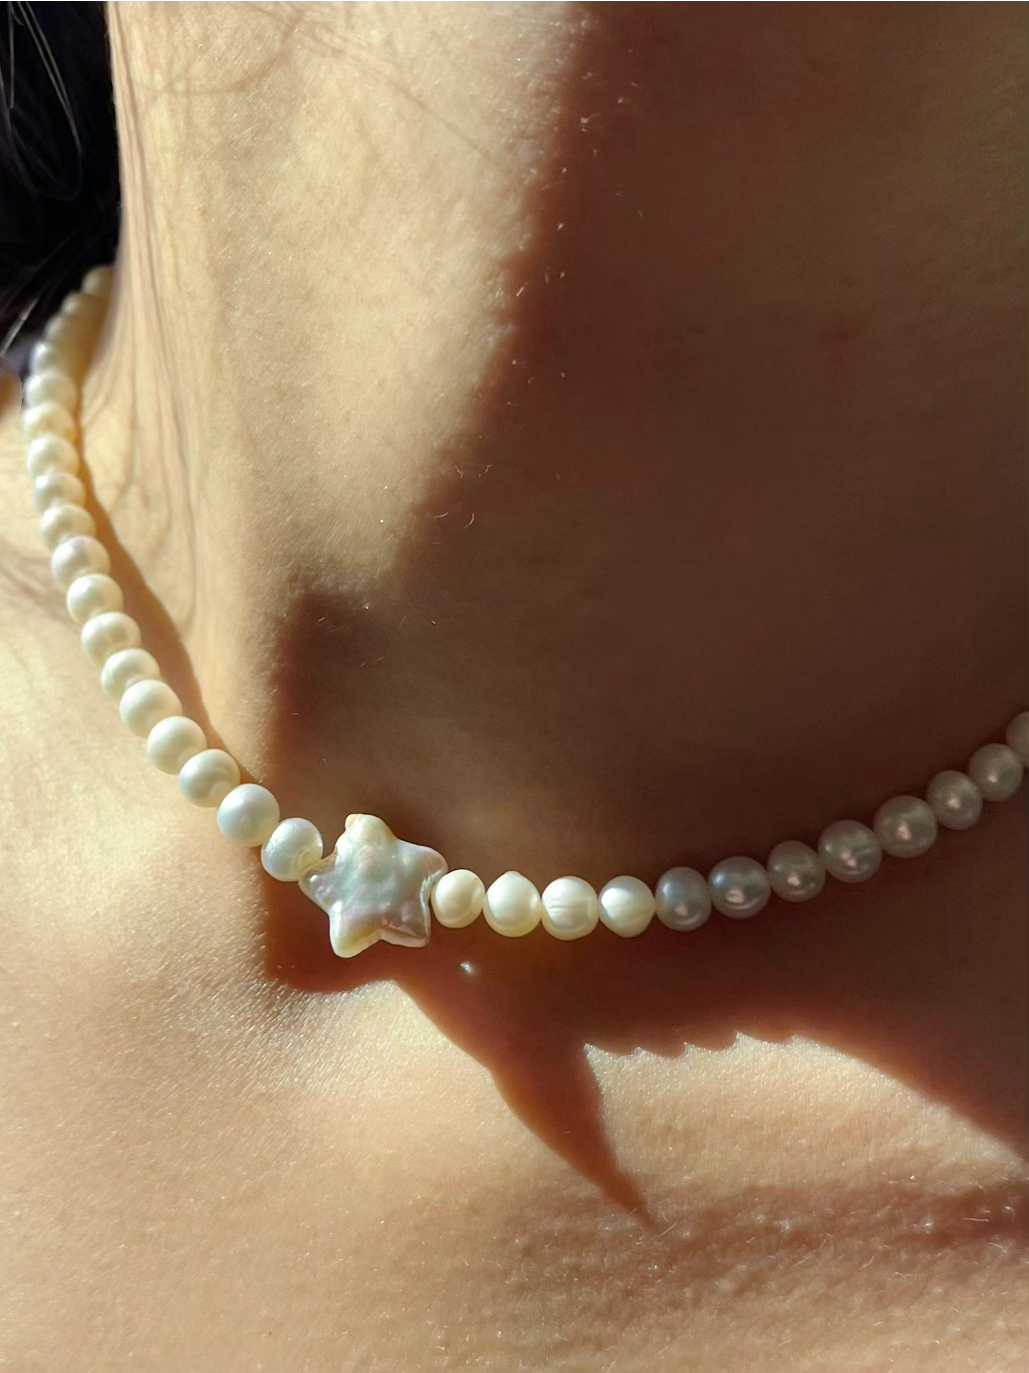 North Star Pearl Choker Necklace is the perfect choice for beach vacation or every day wear. This pearl necklace is made using natural water fresh pearl for both the star pendant and necklace for understated elegance. 